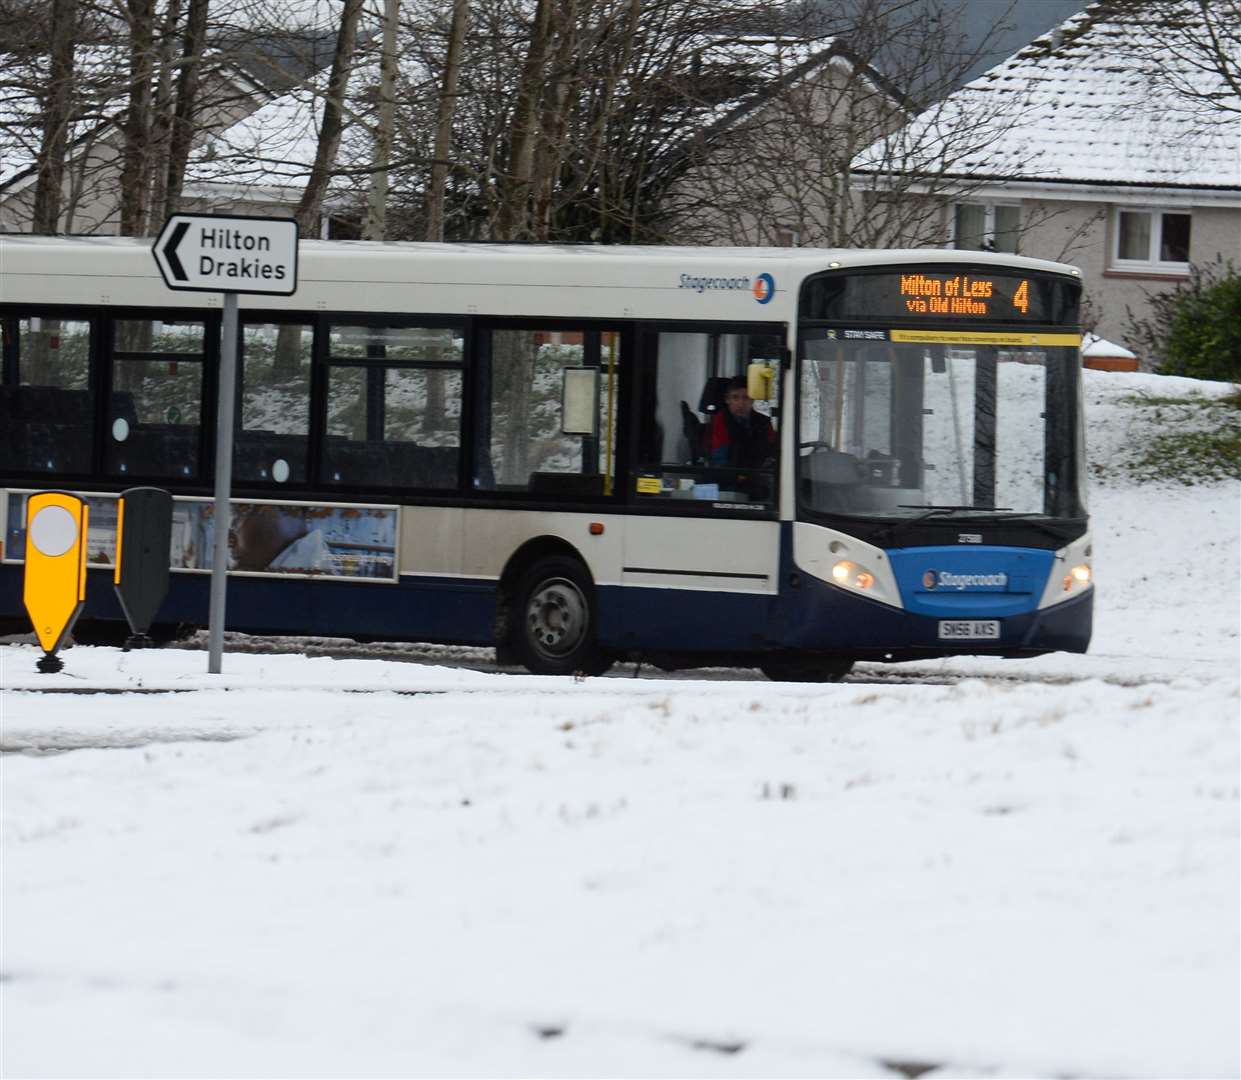 Bus services have now resumed in Inverness.